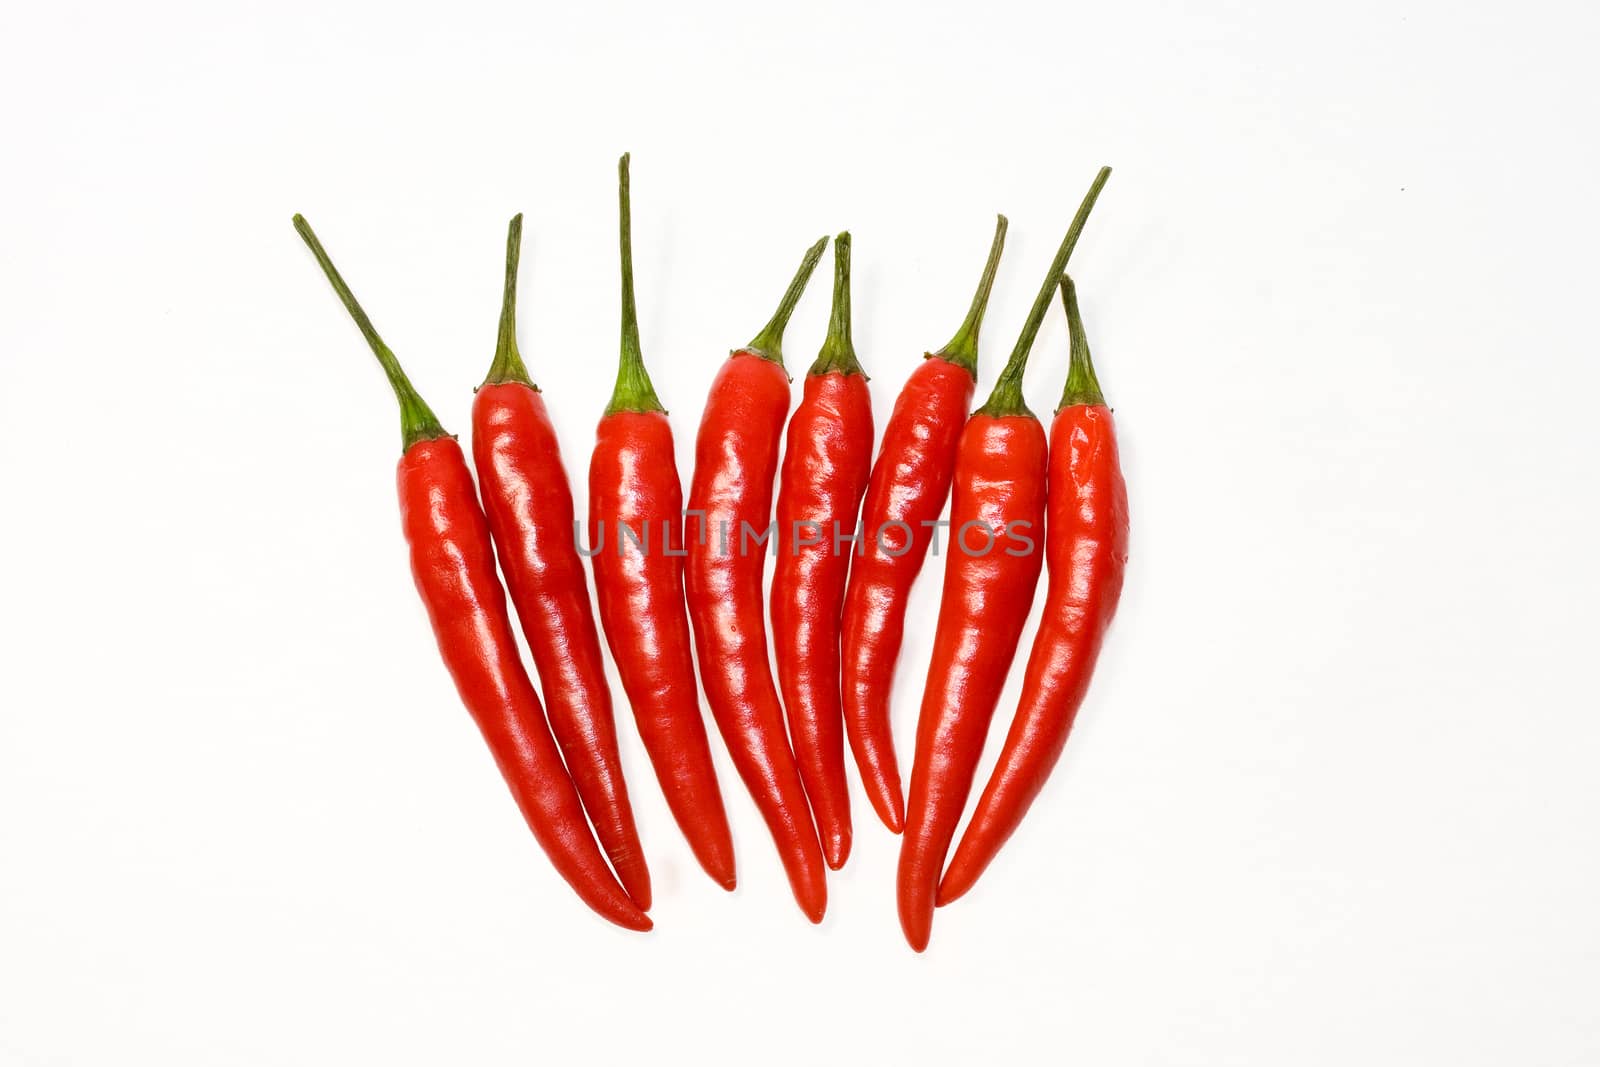 Chili peppers on a white background by aniad